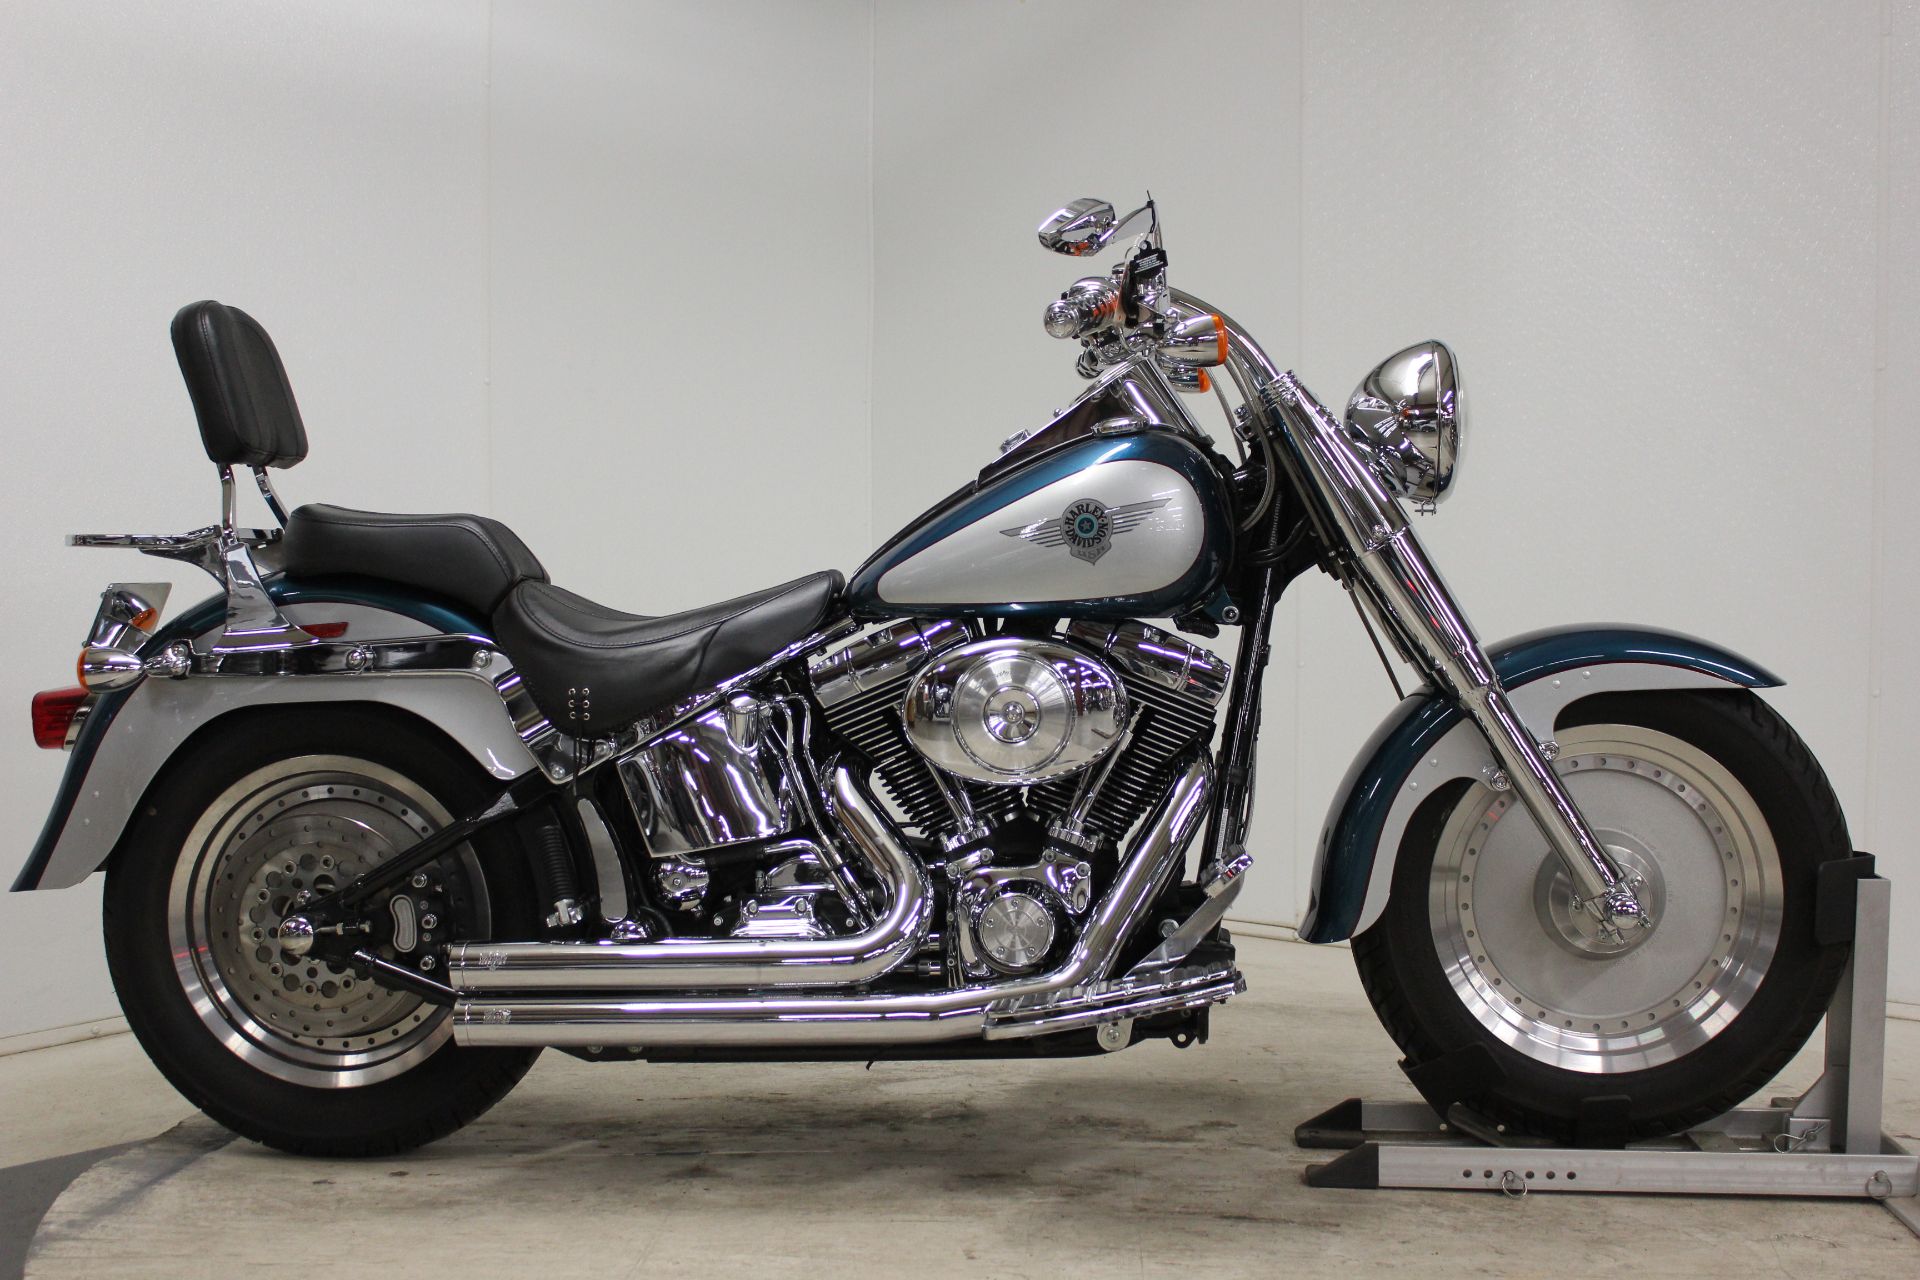 Used 2004 Harley Davidson Flstf Flstfi Fat Boy Two Tone Luxury Teal And Brilliant Silver Motorcycles In Pittsfield Ma 052374